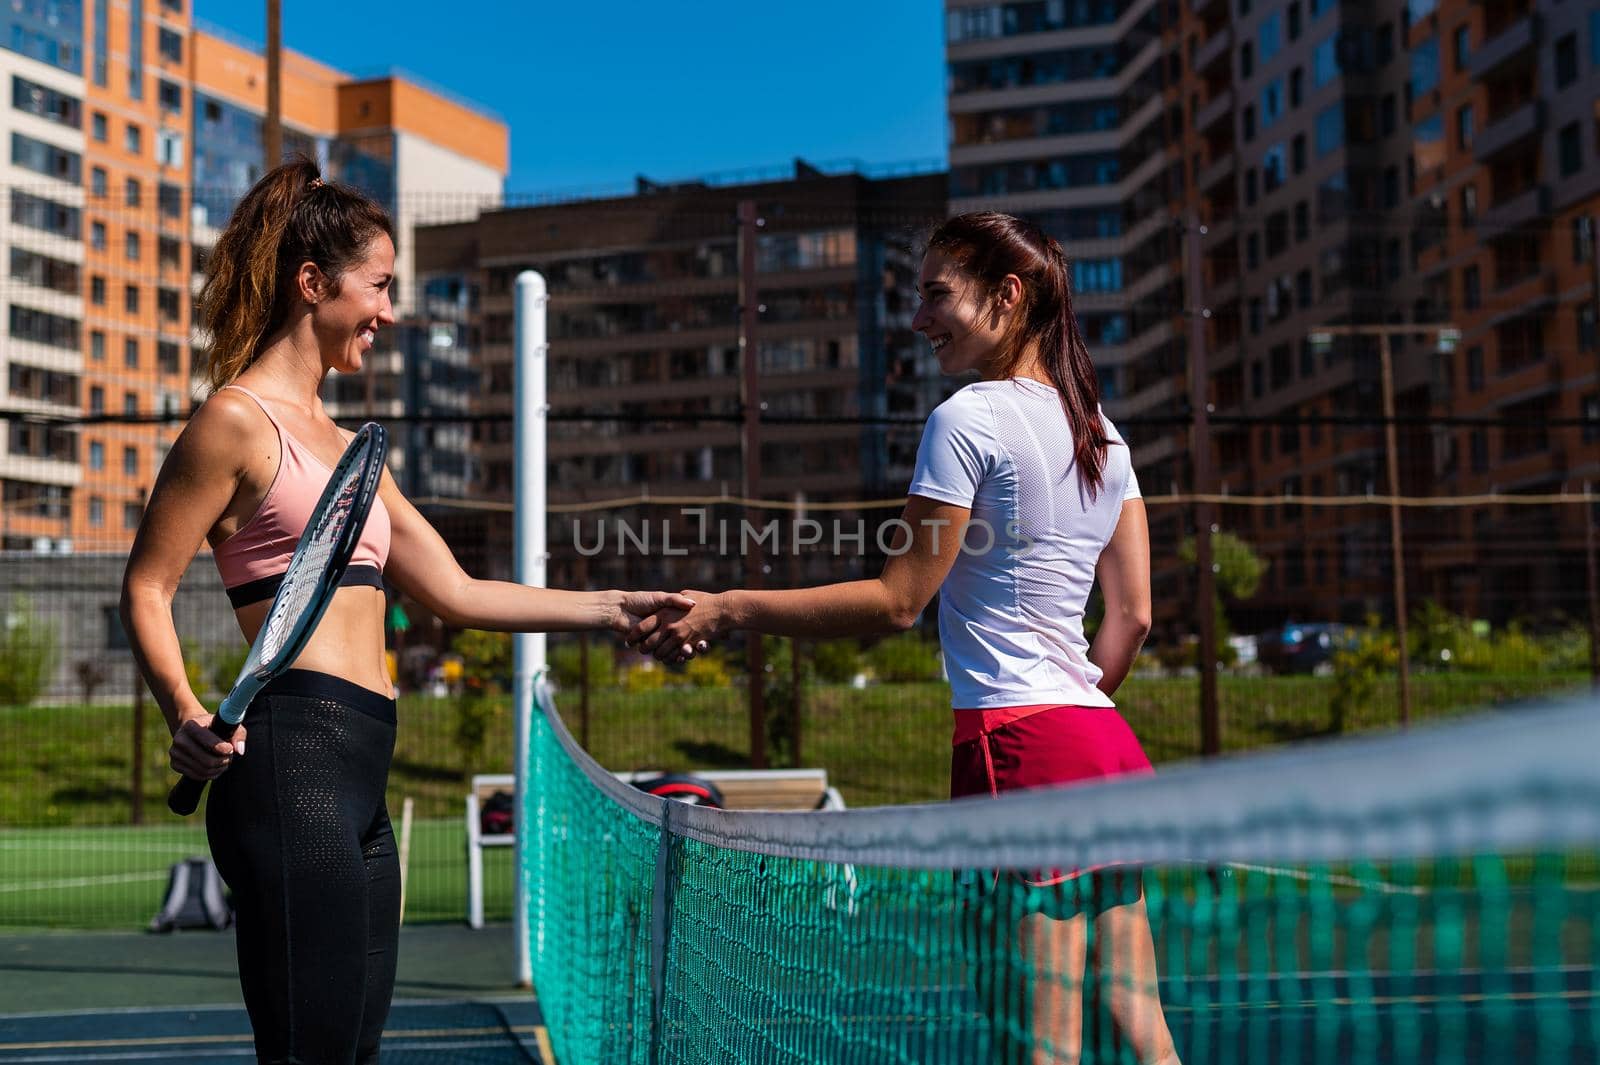 Two Caucasian women in sportswear shake hands after a tennis match on outdoor court. by mrwed54